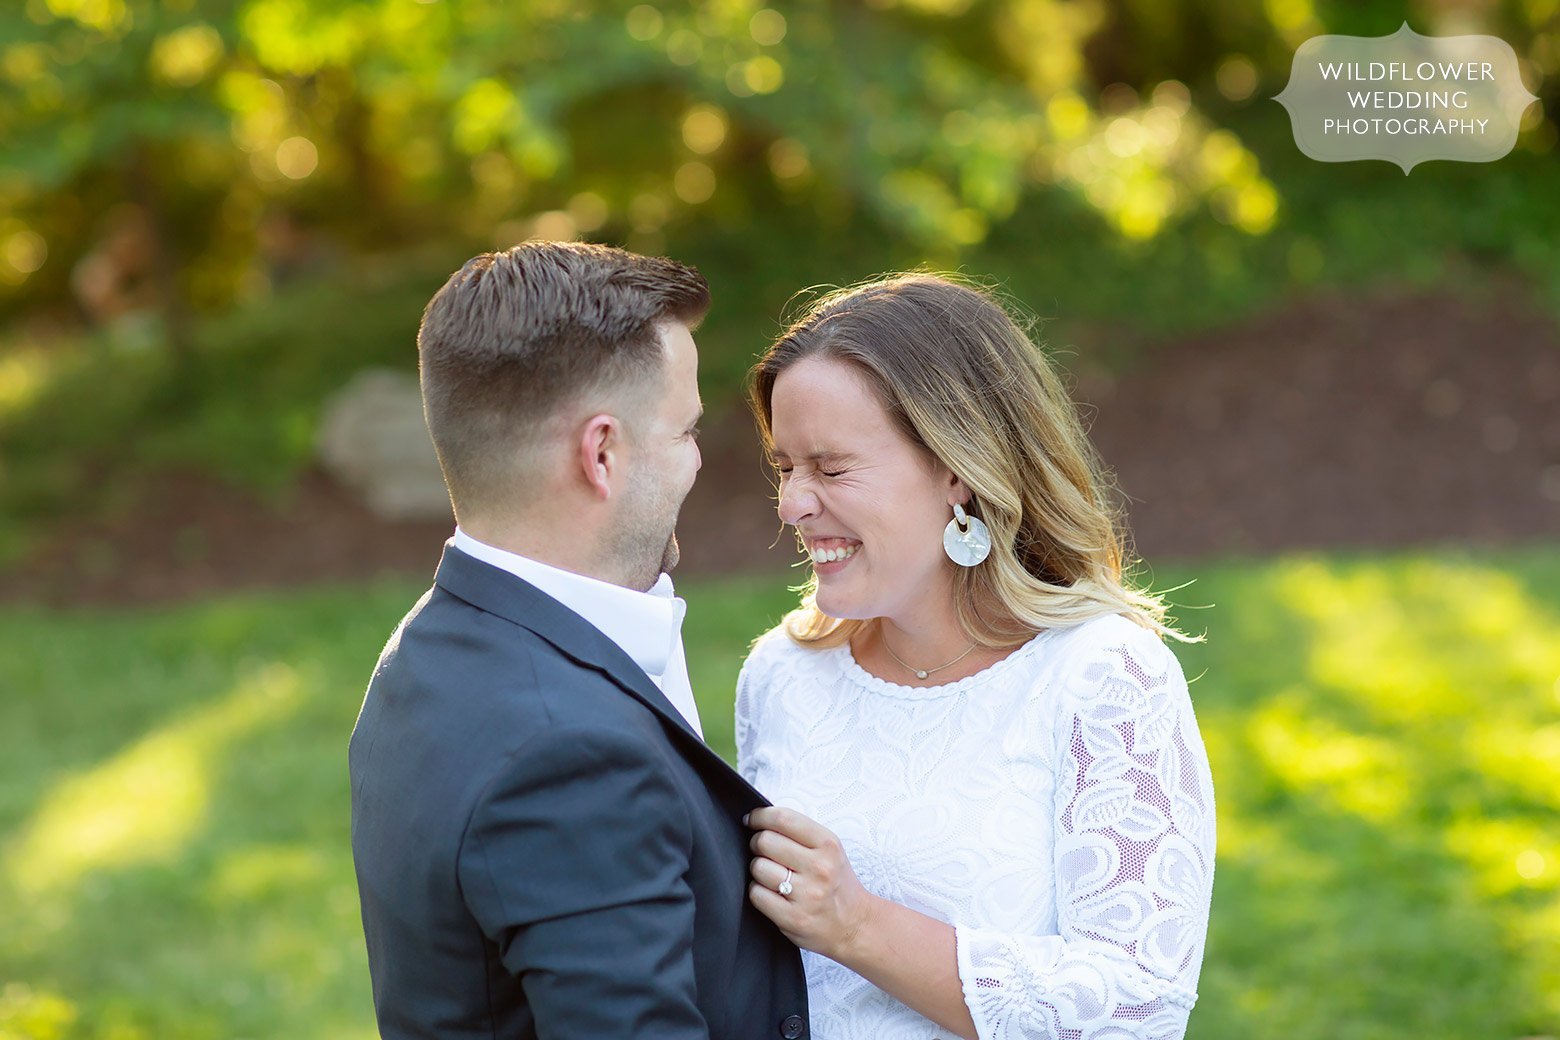 Happy engagement photography in Columbia, MO.